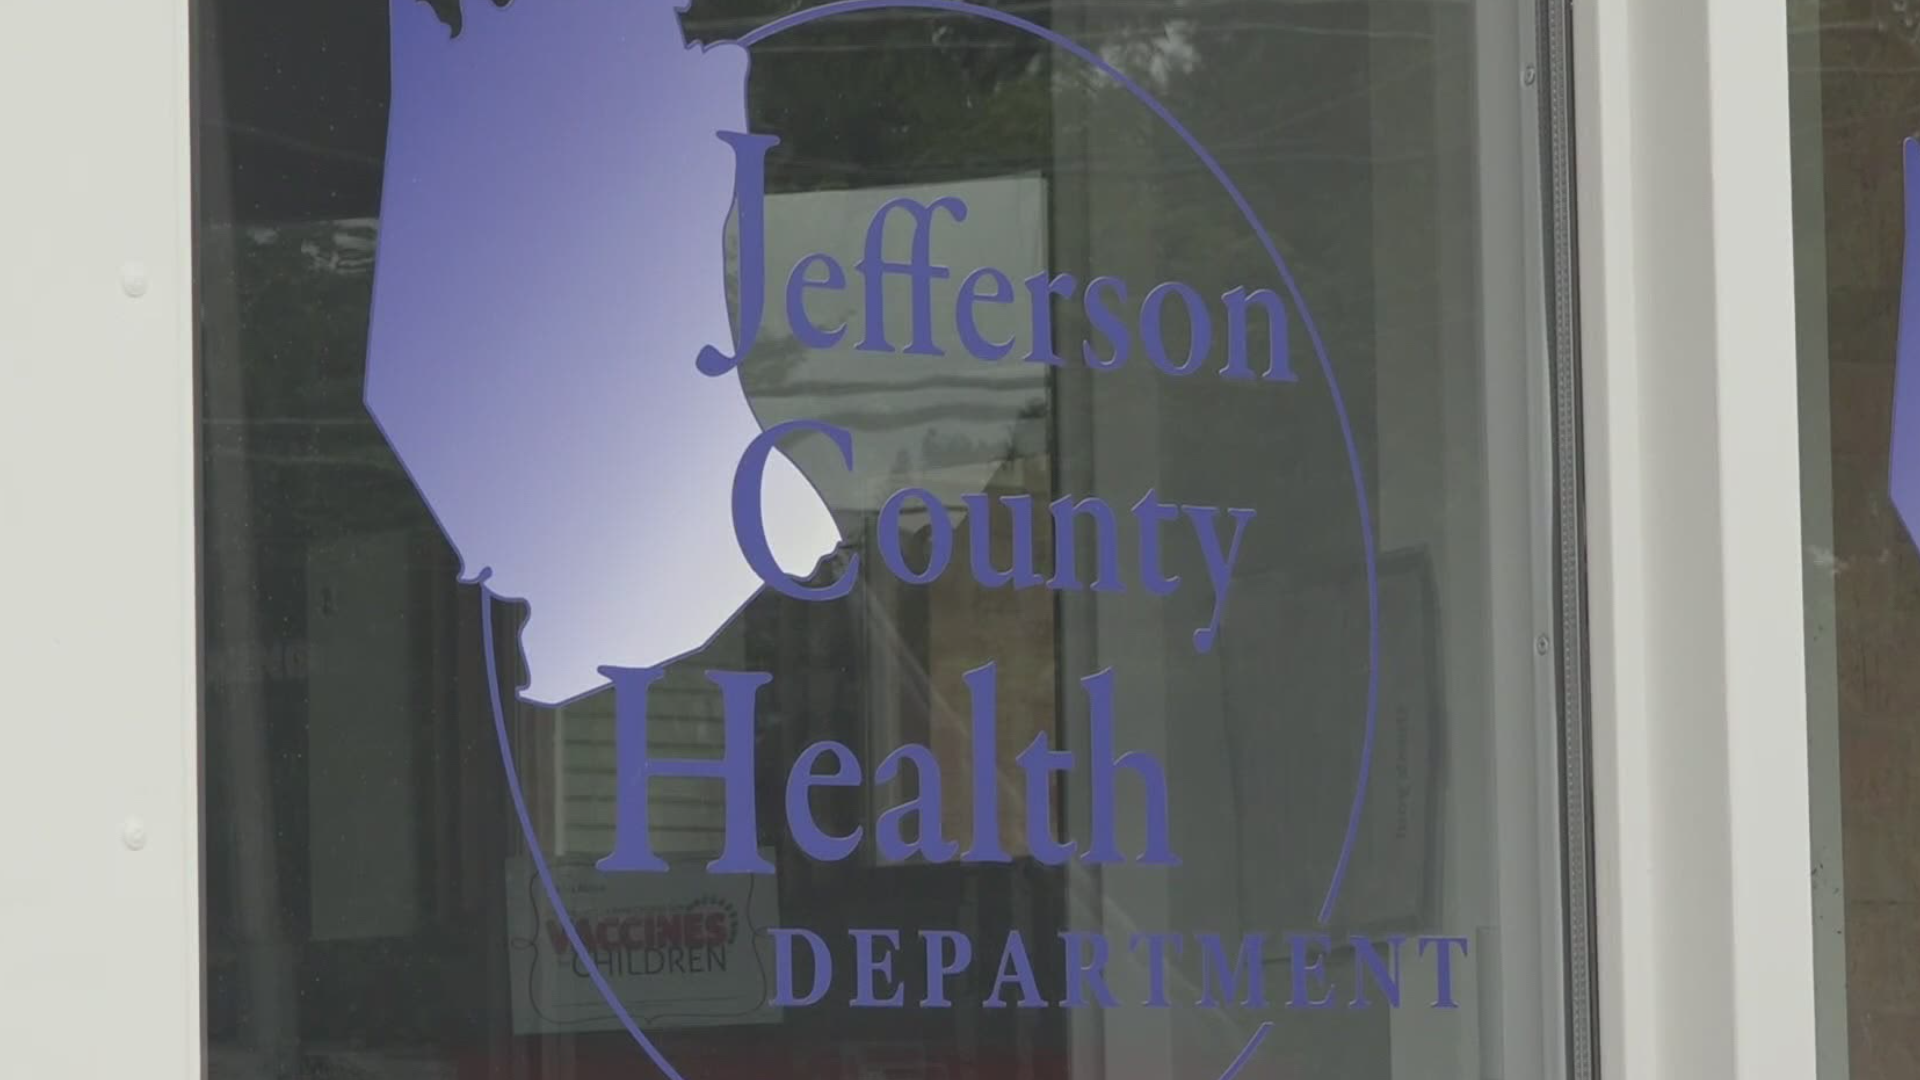 “It took weeks to earn our current status,” Jefferson County Health Director Kelley Vollmar said, “and it will take just as long to pull ourselves back out"